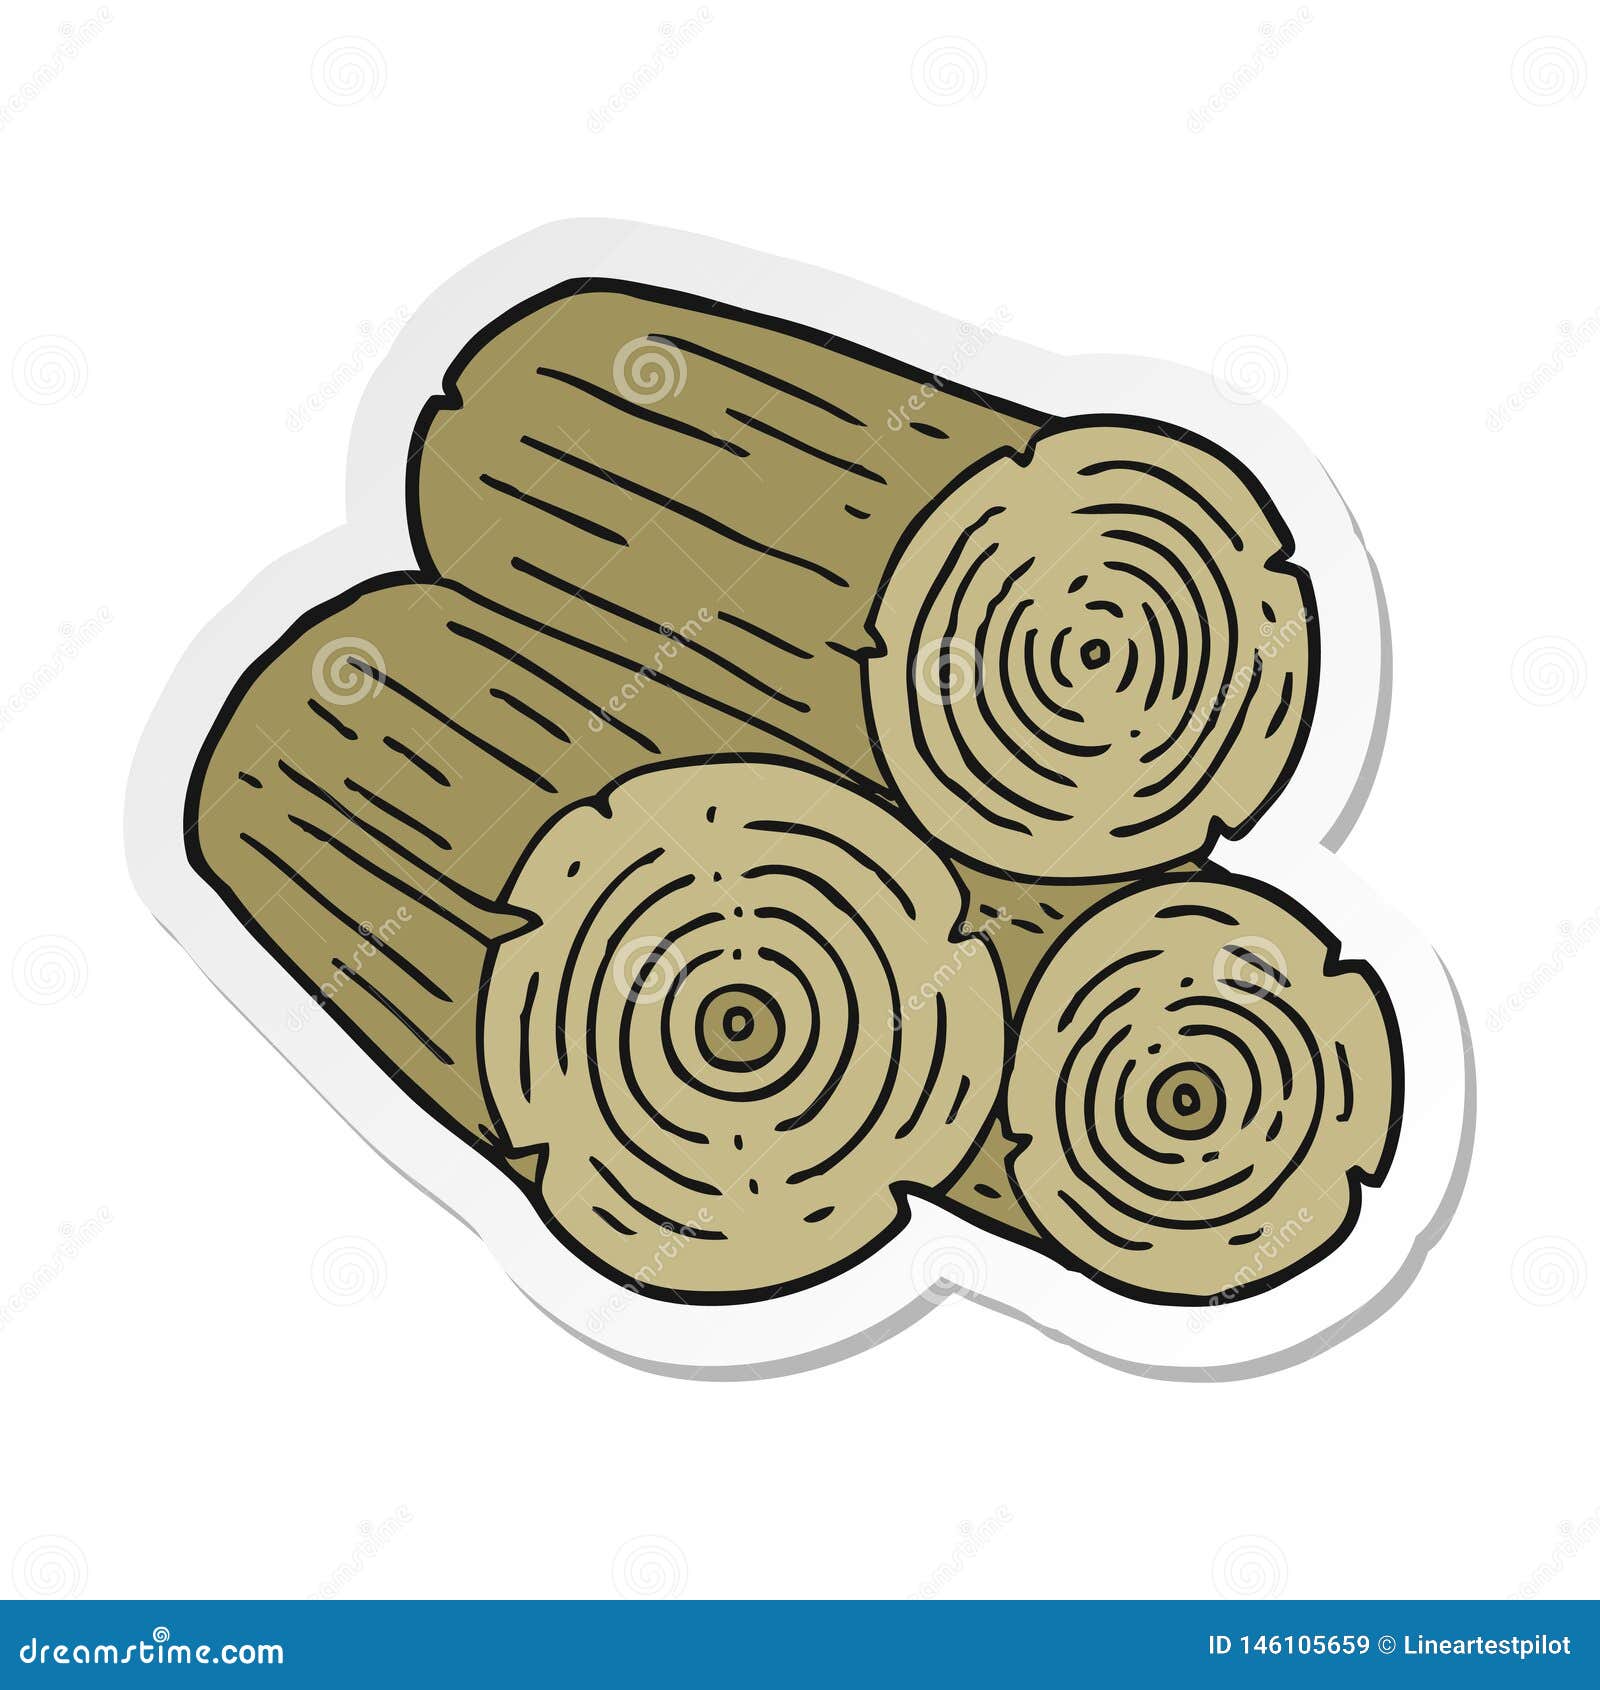 Sticker of a cartoon logs stock vector. Illustration of quirky - 146105659